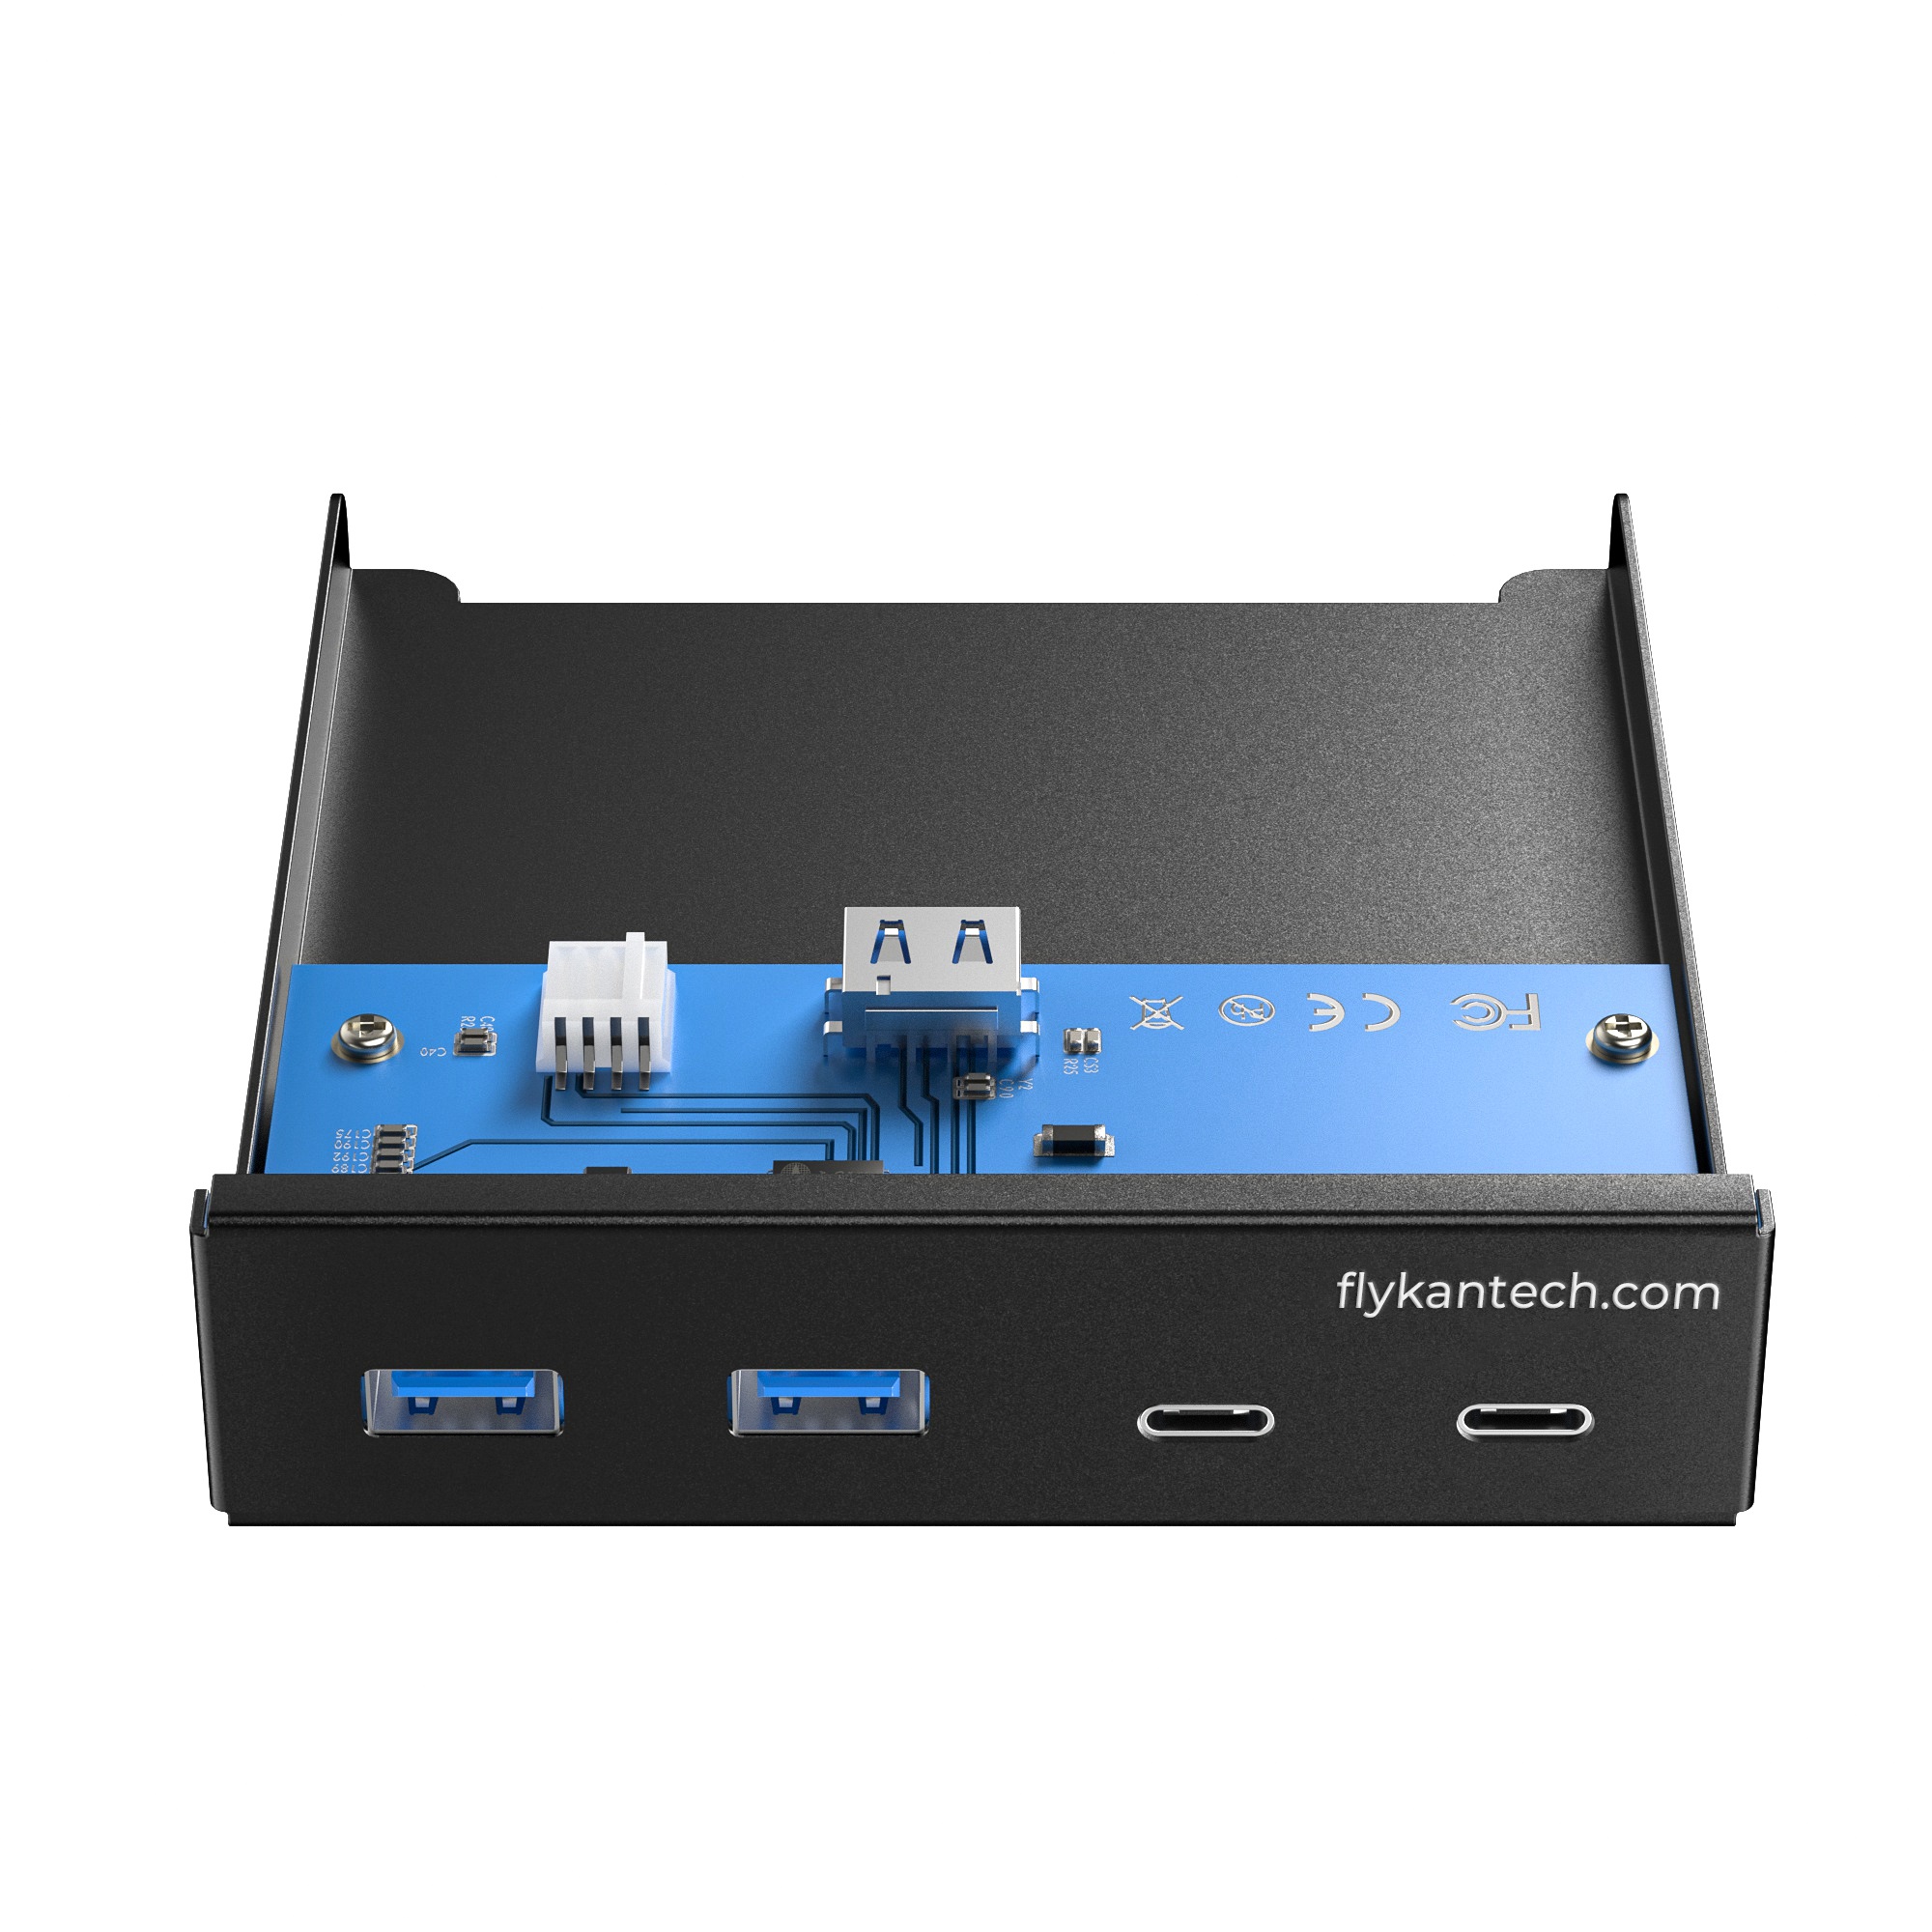 USB35-2A2C-10G | USB 3.2 Front Panel 4 Port Hub - 10Gbps - 3.5in Bay